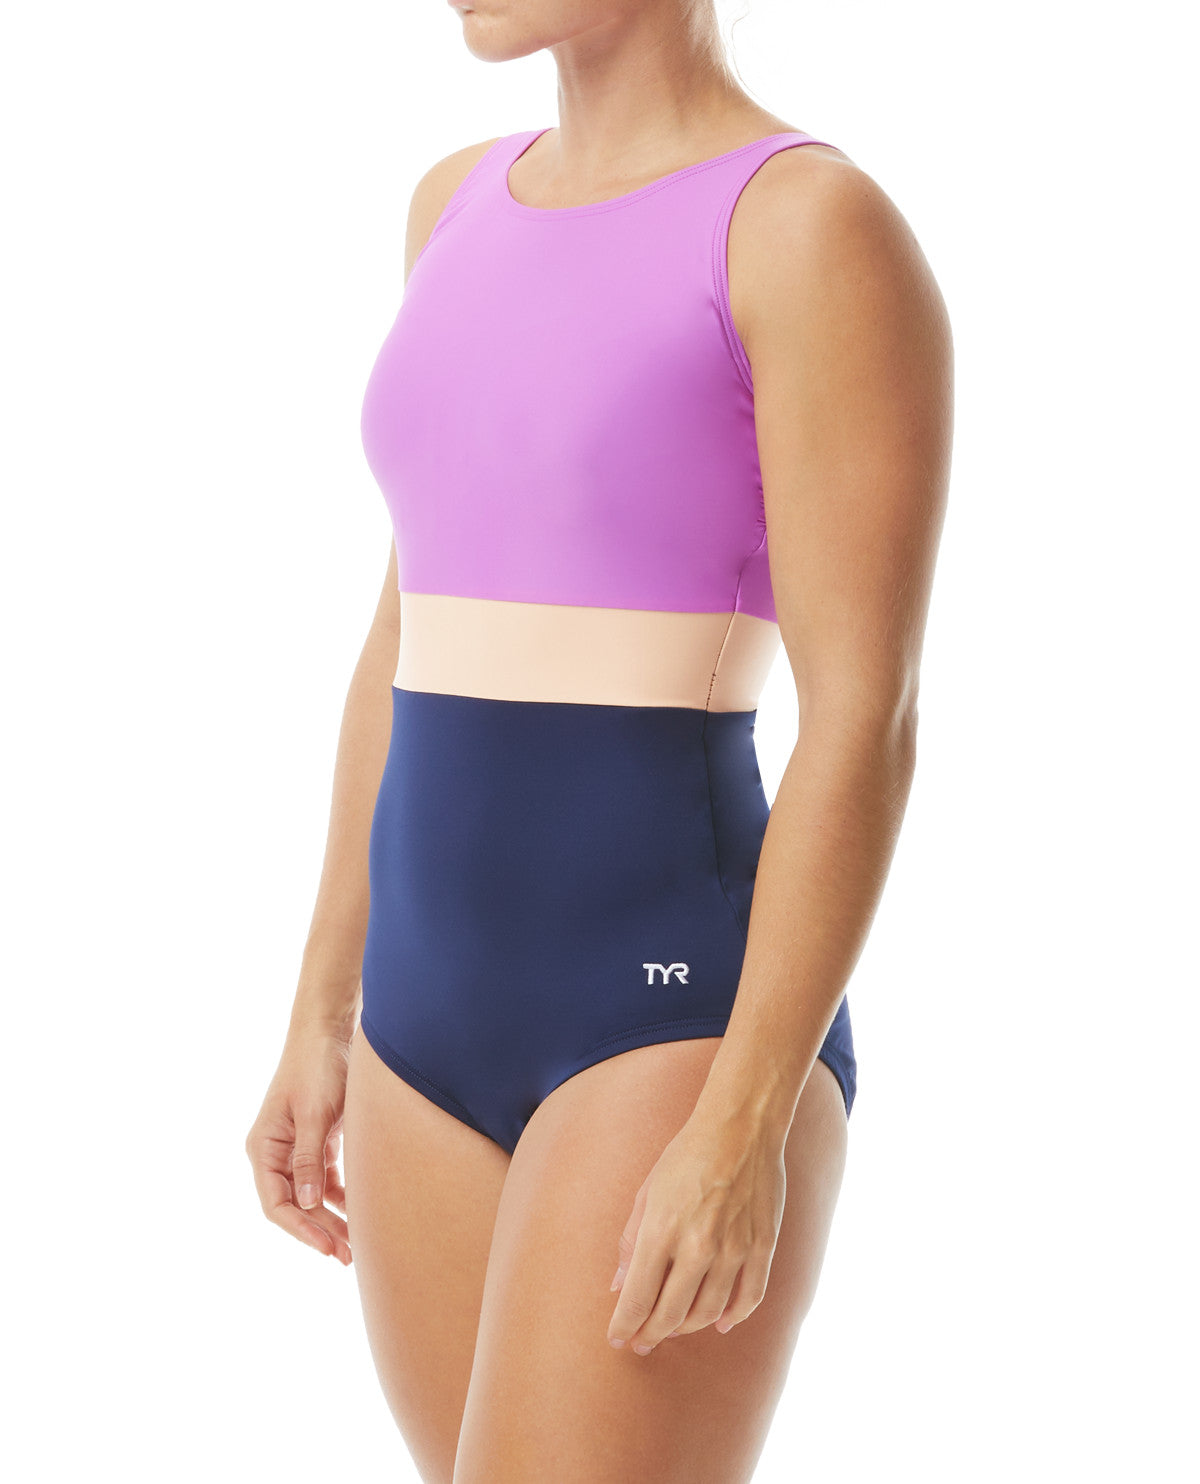 W TYR Splice Belted Controlfit Swimsuit – Runners' Choice Kingston